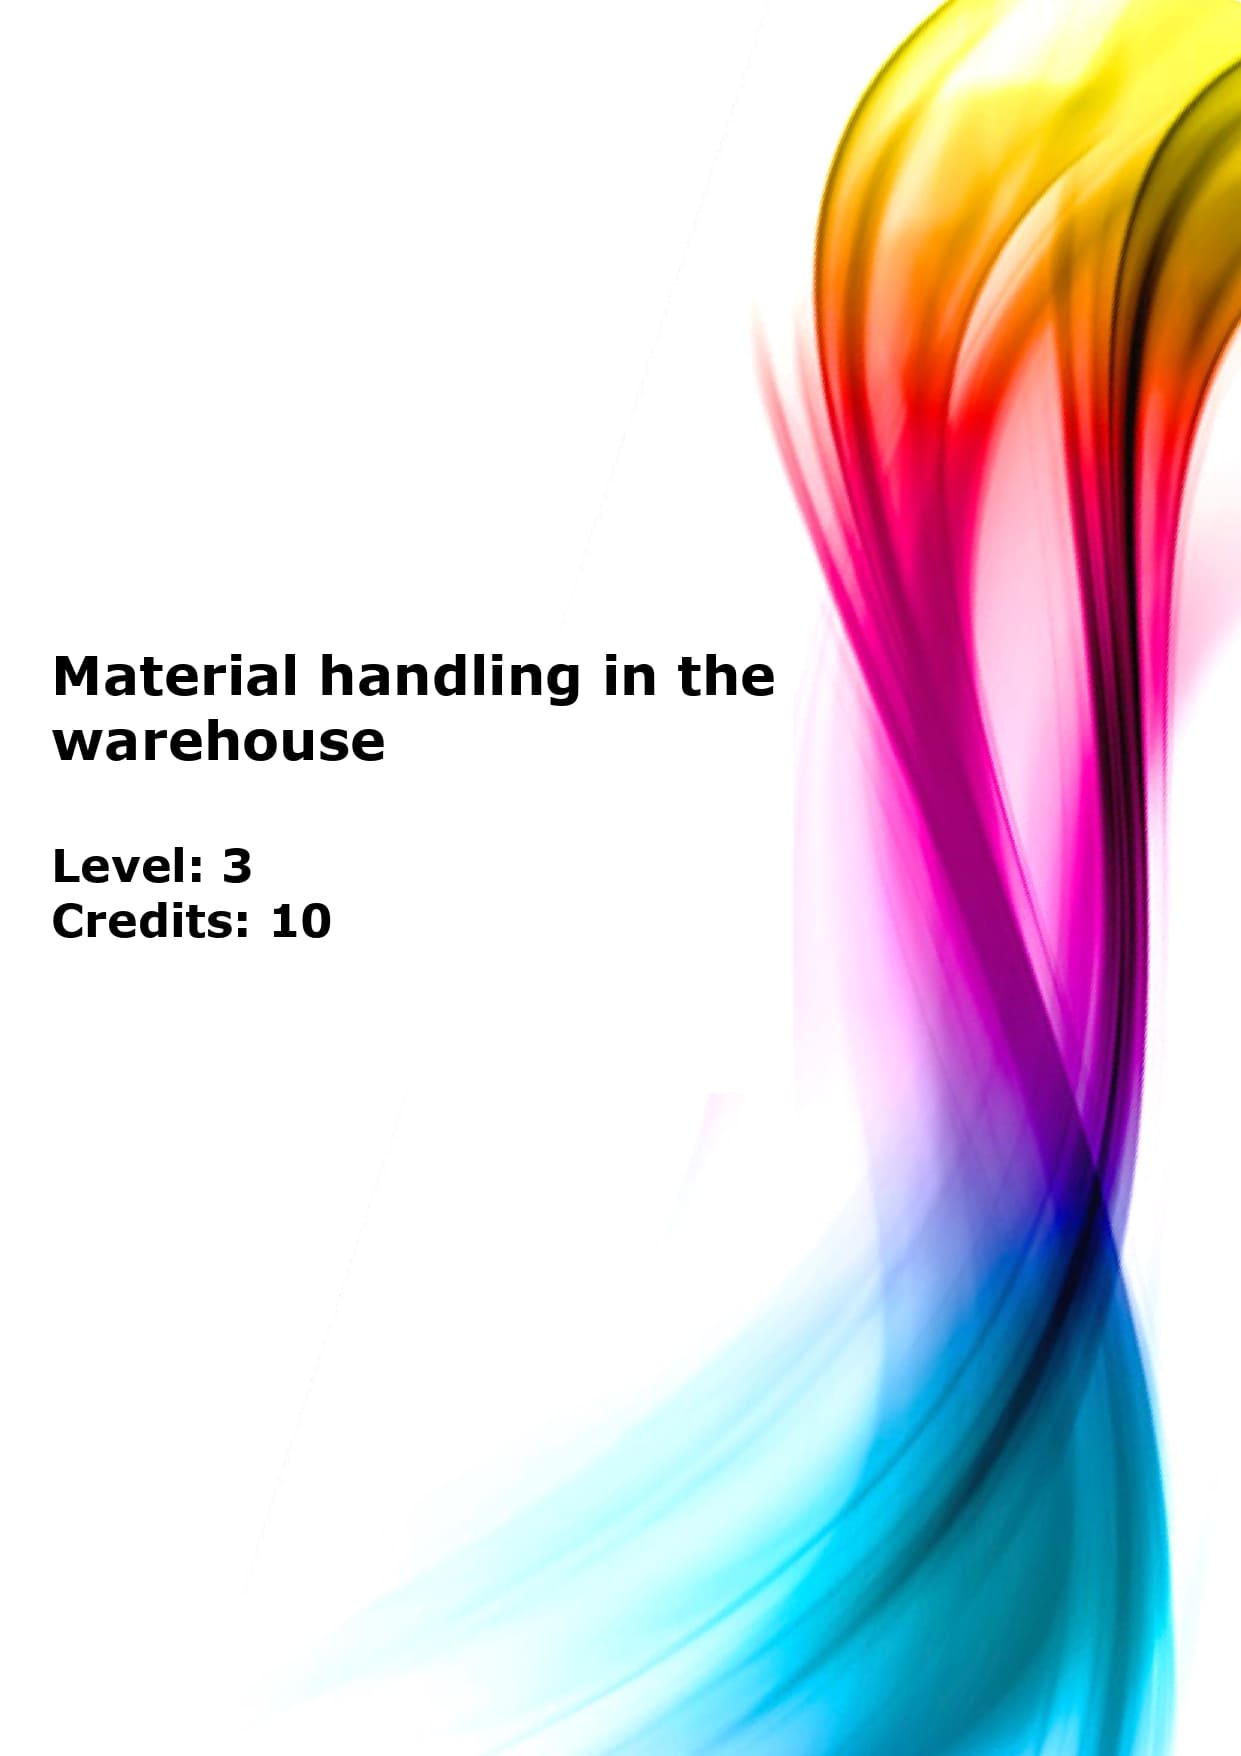 Explain the role of materials handling in the warehouse US